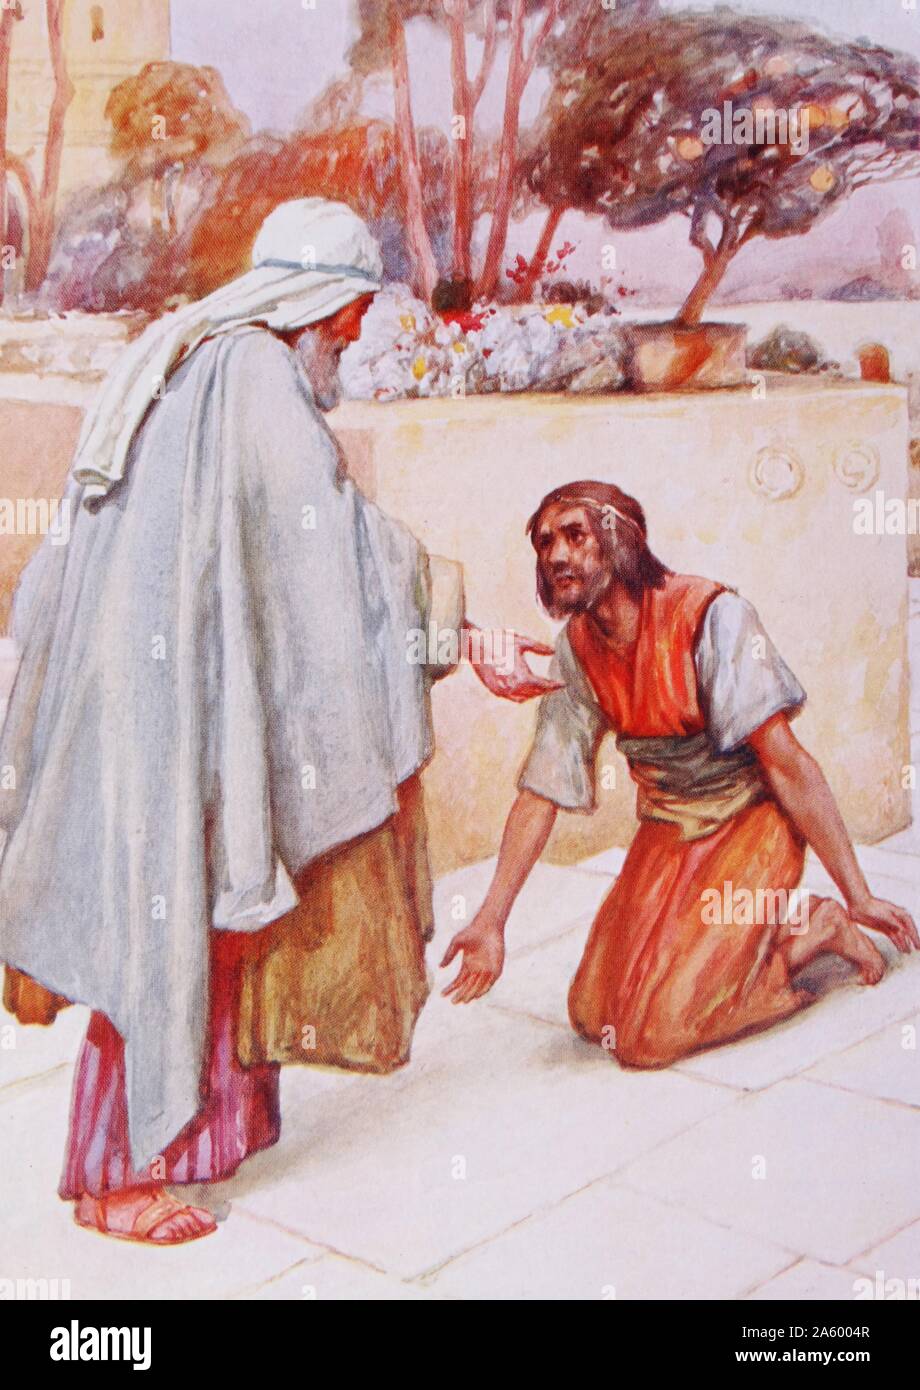 Painting depicting the return of the prodigal son Stock Photo